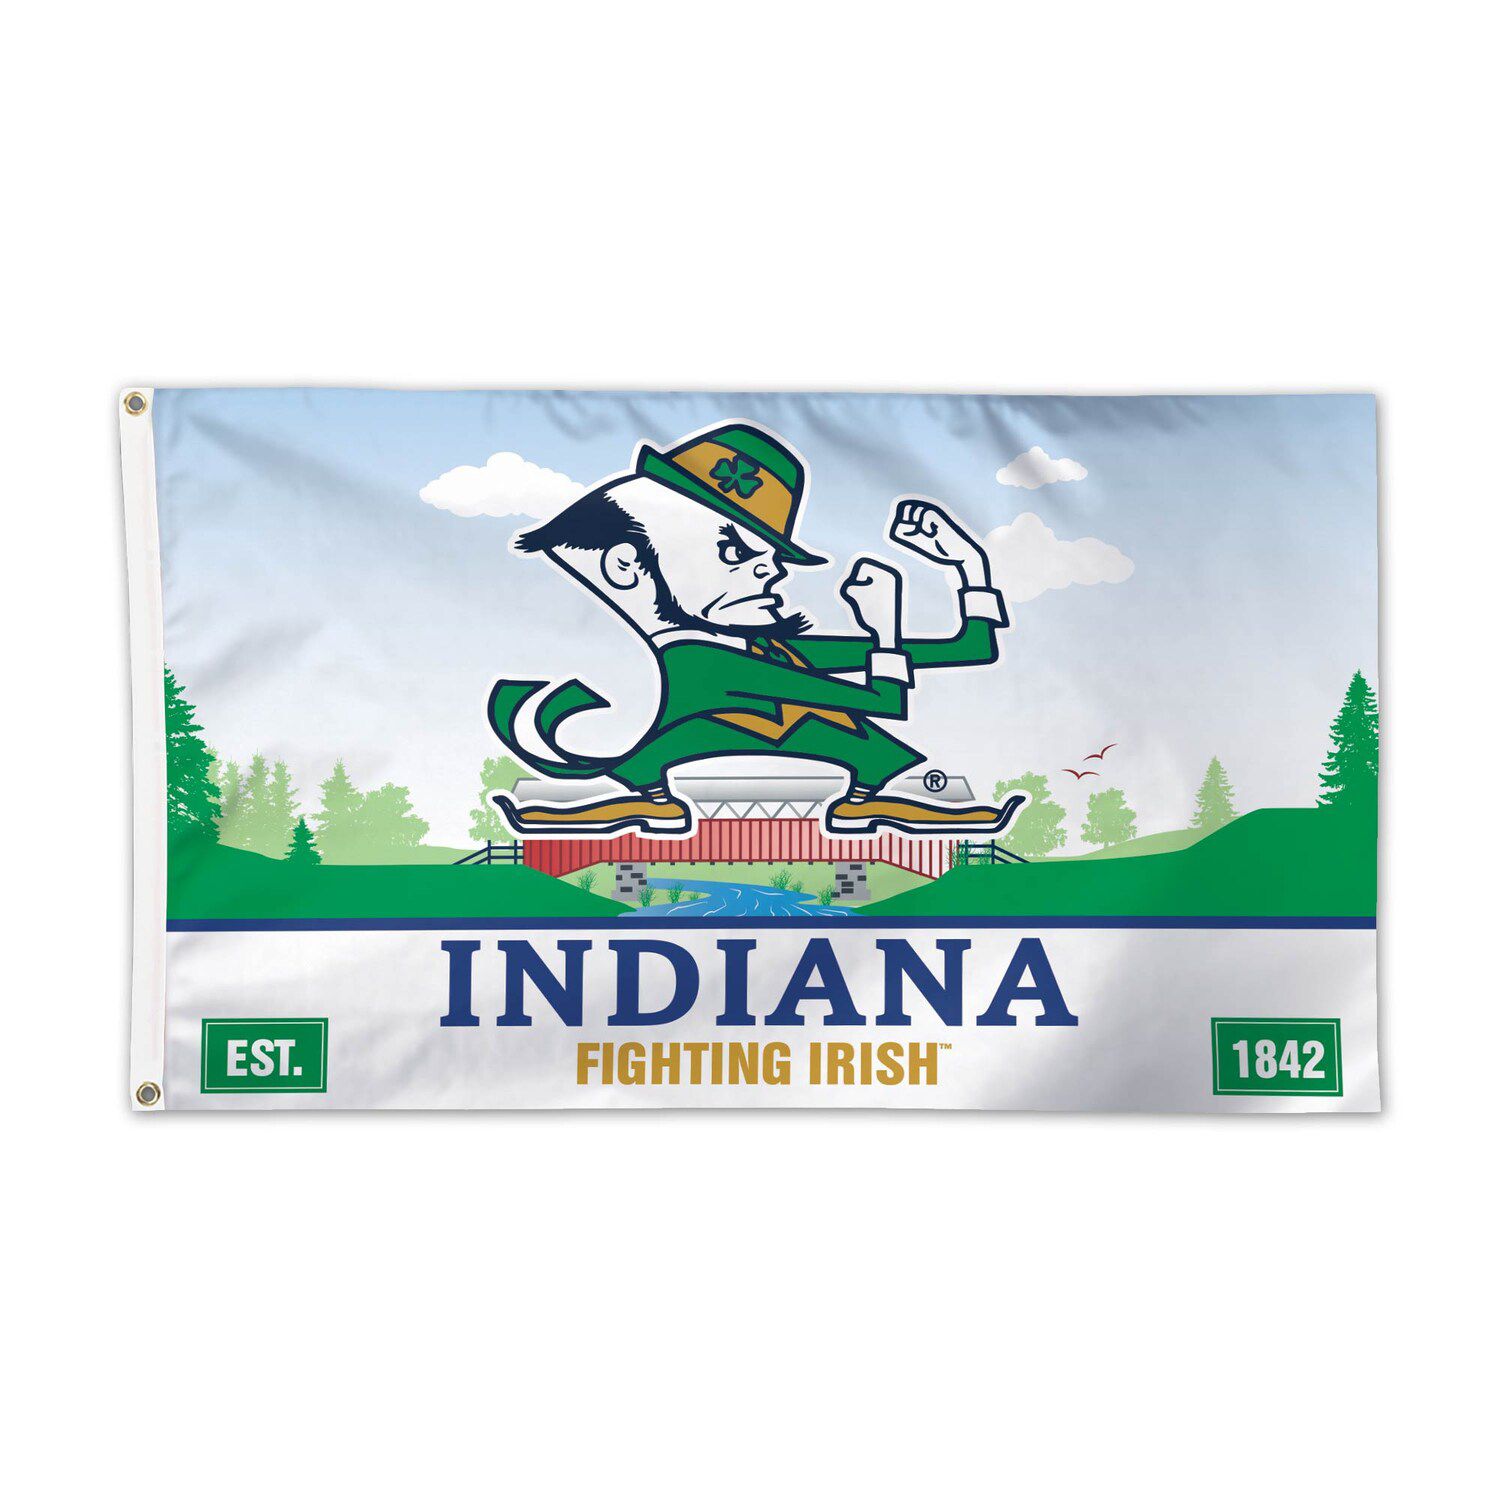 Image for Unbranded WinCraft Notre Dame Fighting Irish Indiana State License Plate One-Sided 3' x 5' Flag at Kohl's.